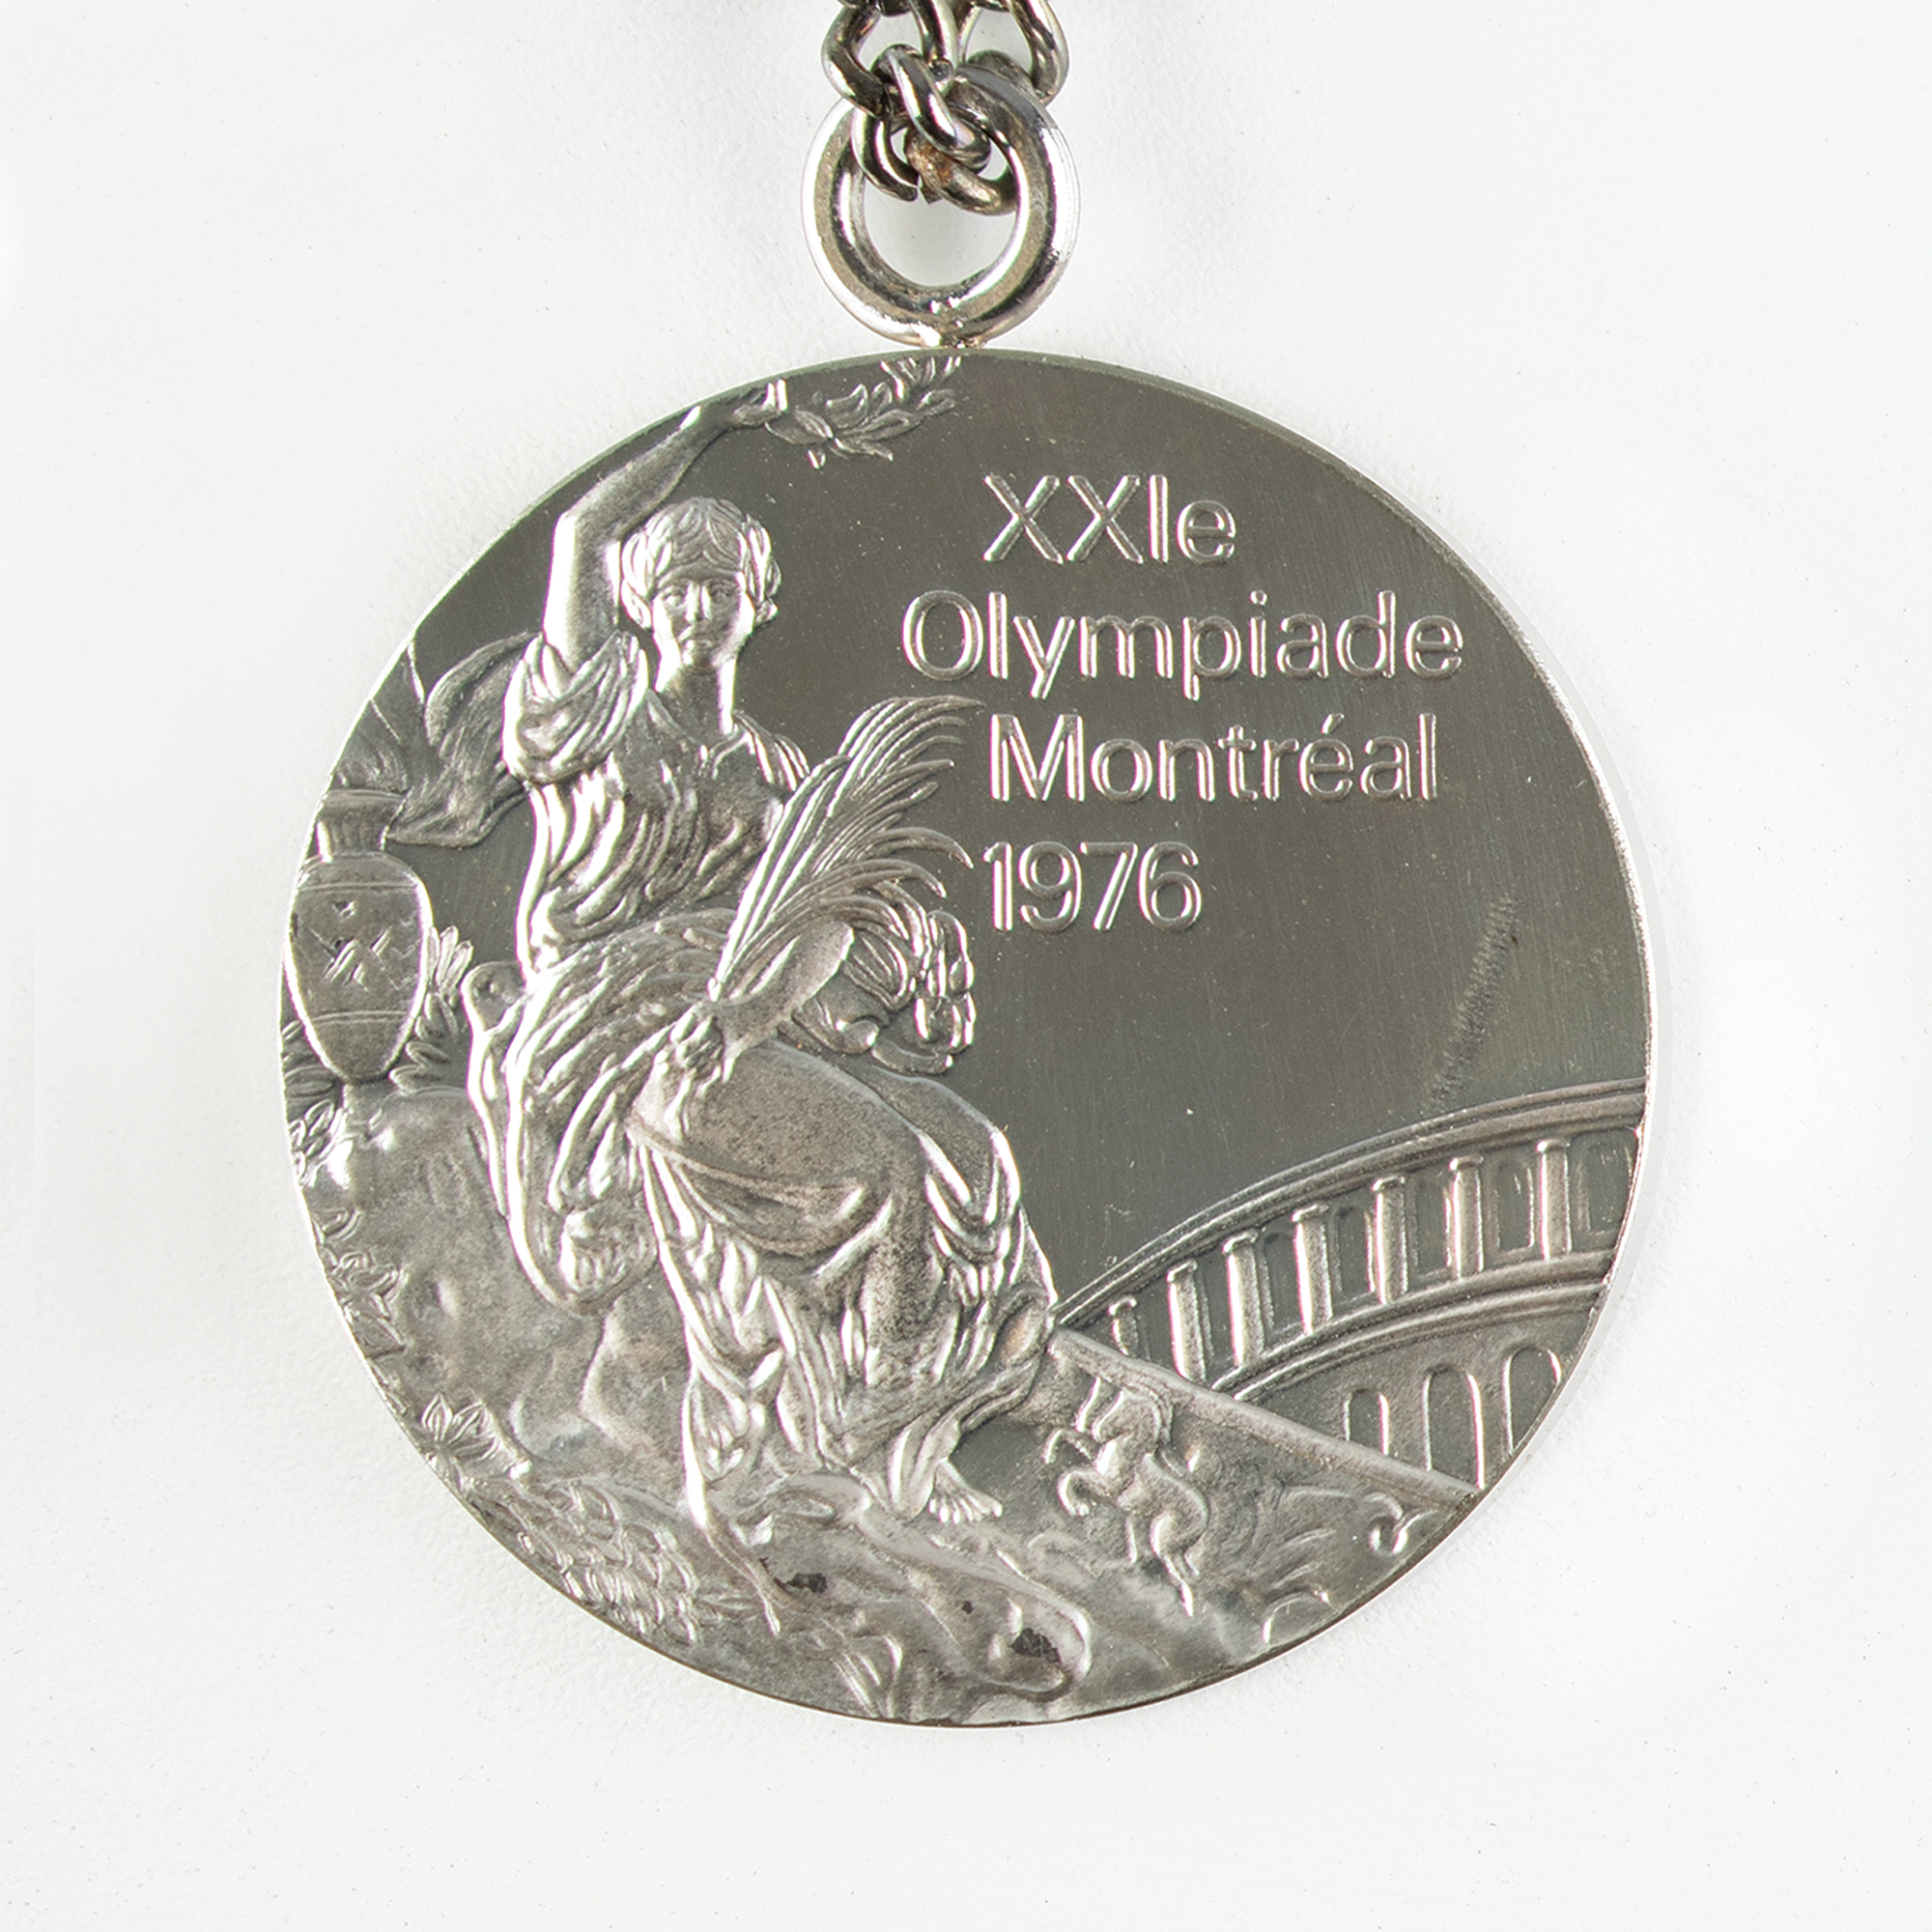 MONTREAL 1976 Olympic Replica SILVER MEDAL 